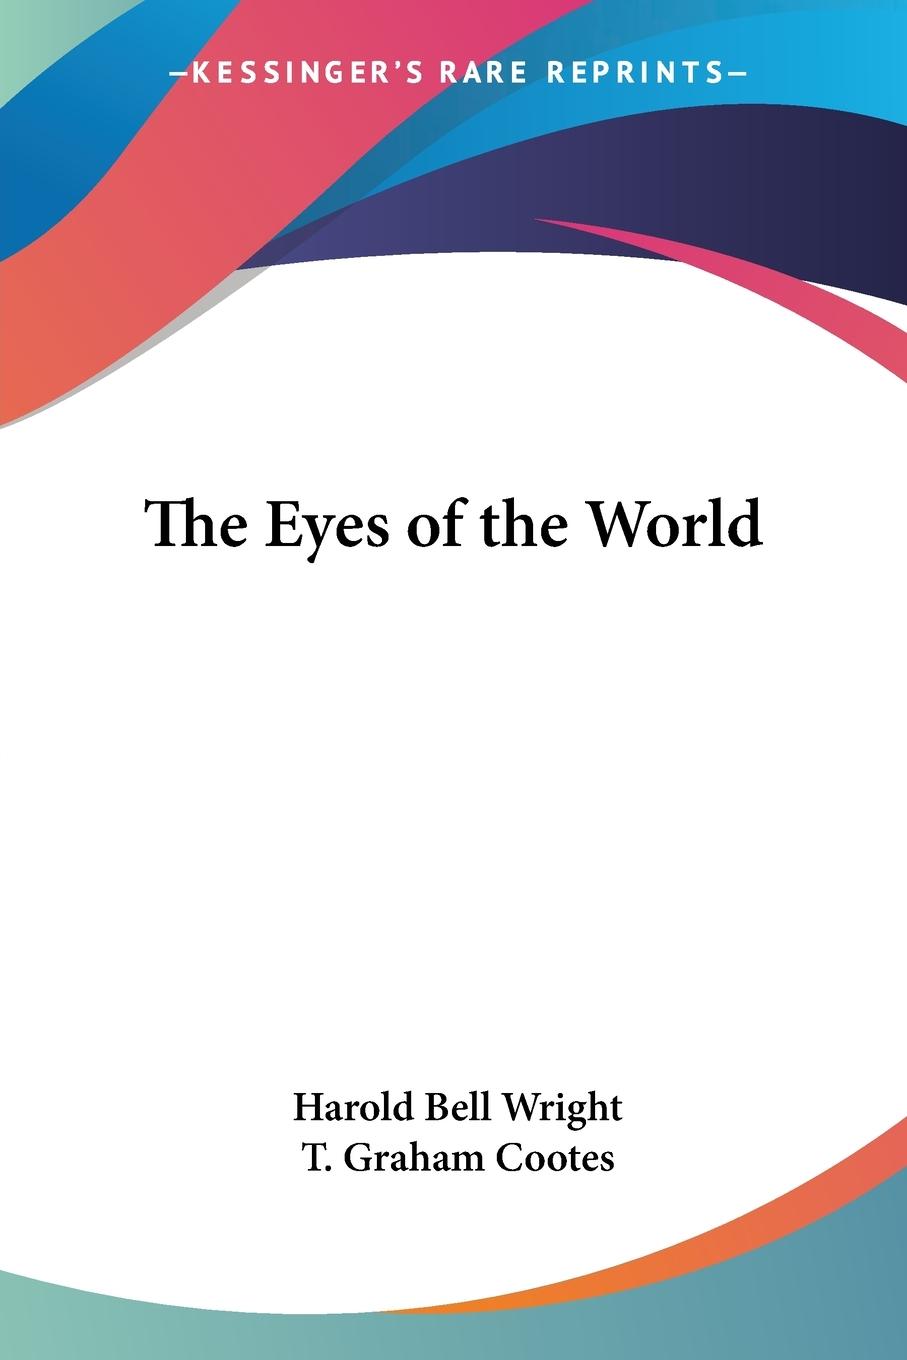 The Eyes of the World - Wright, Harold Bell